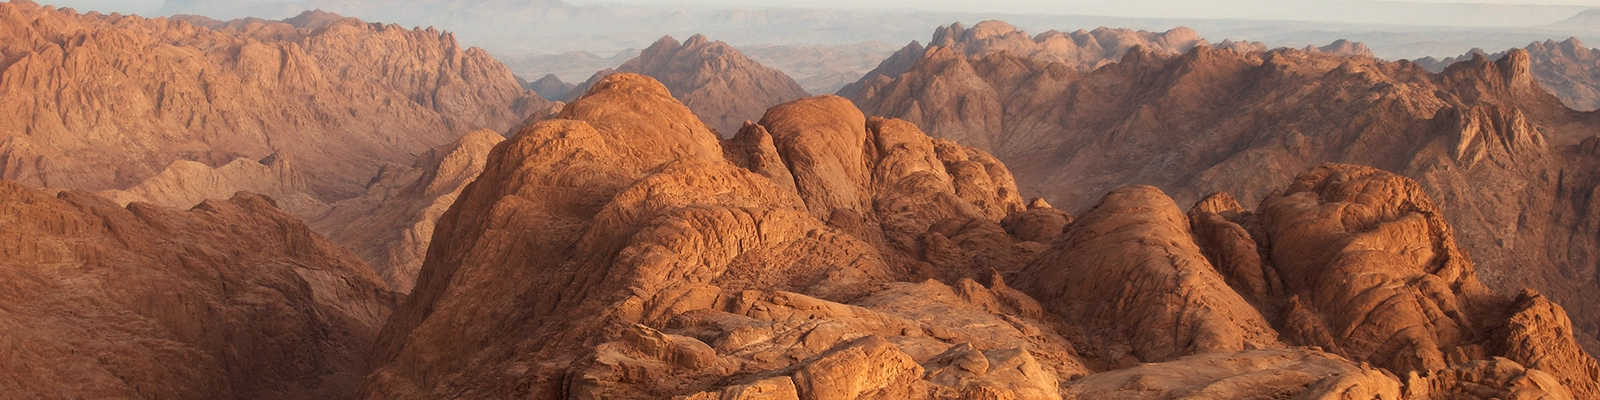 Stunning view of Mount Sinai's rugged peaks and surrounding desert landscape in Egypt